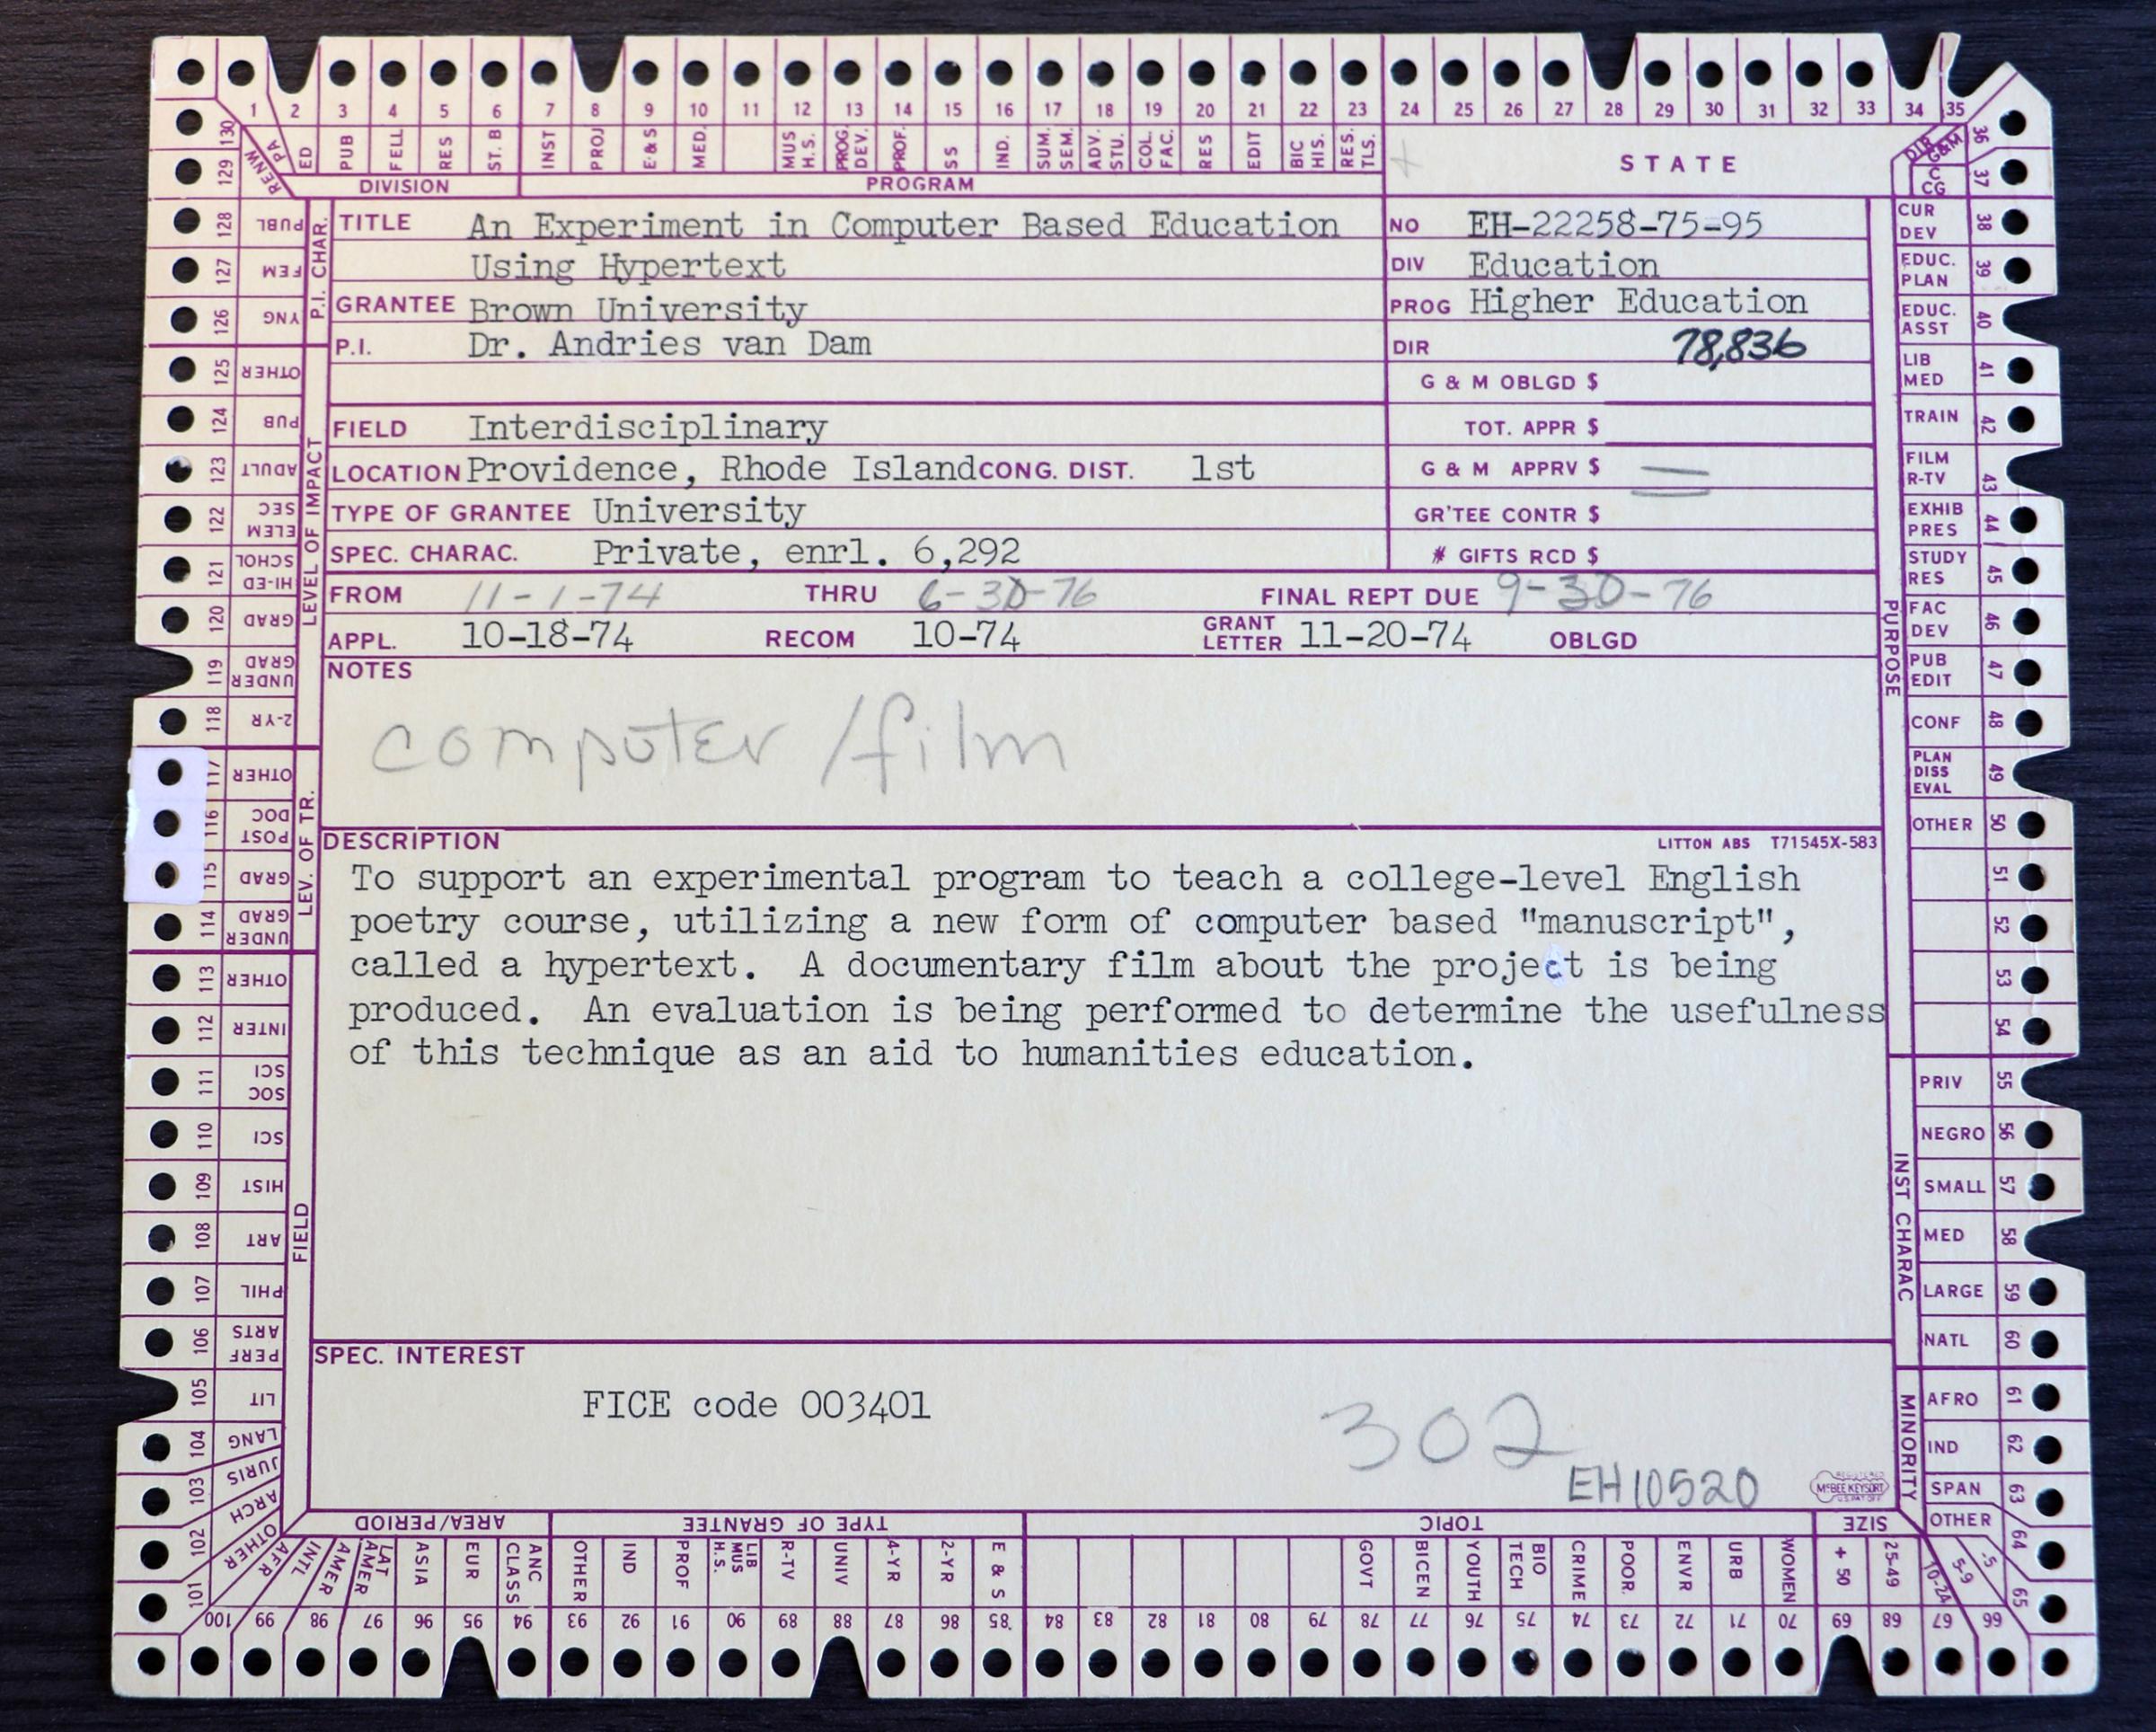 A 1974 Education grant to Dr. Andries van Dam at Brown University: An Experiment in Computer Based Education Using Hypertext.